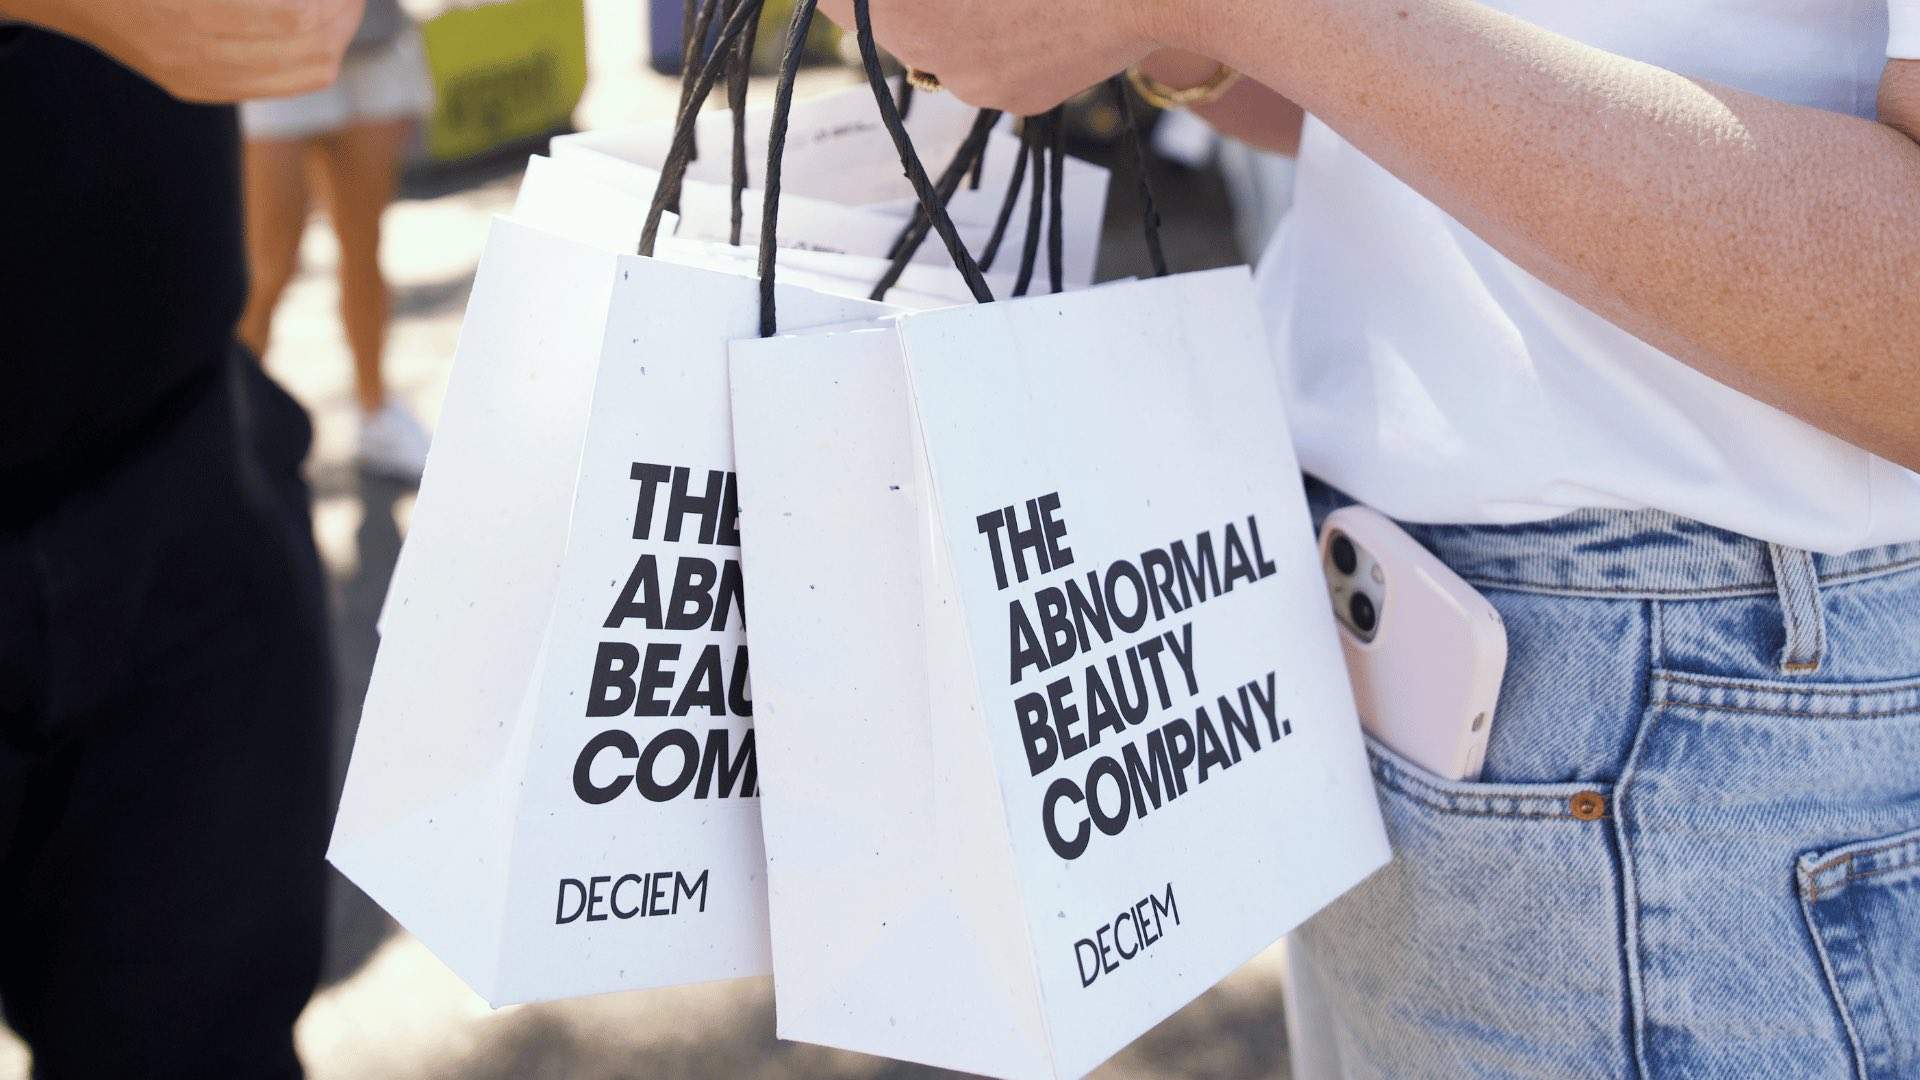 The Ordinary shopping bags.